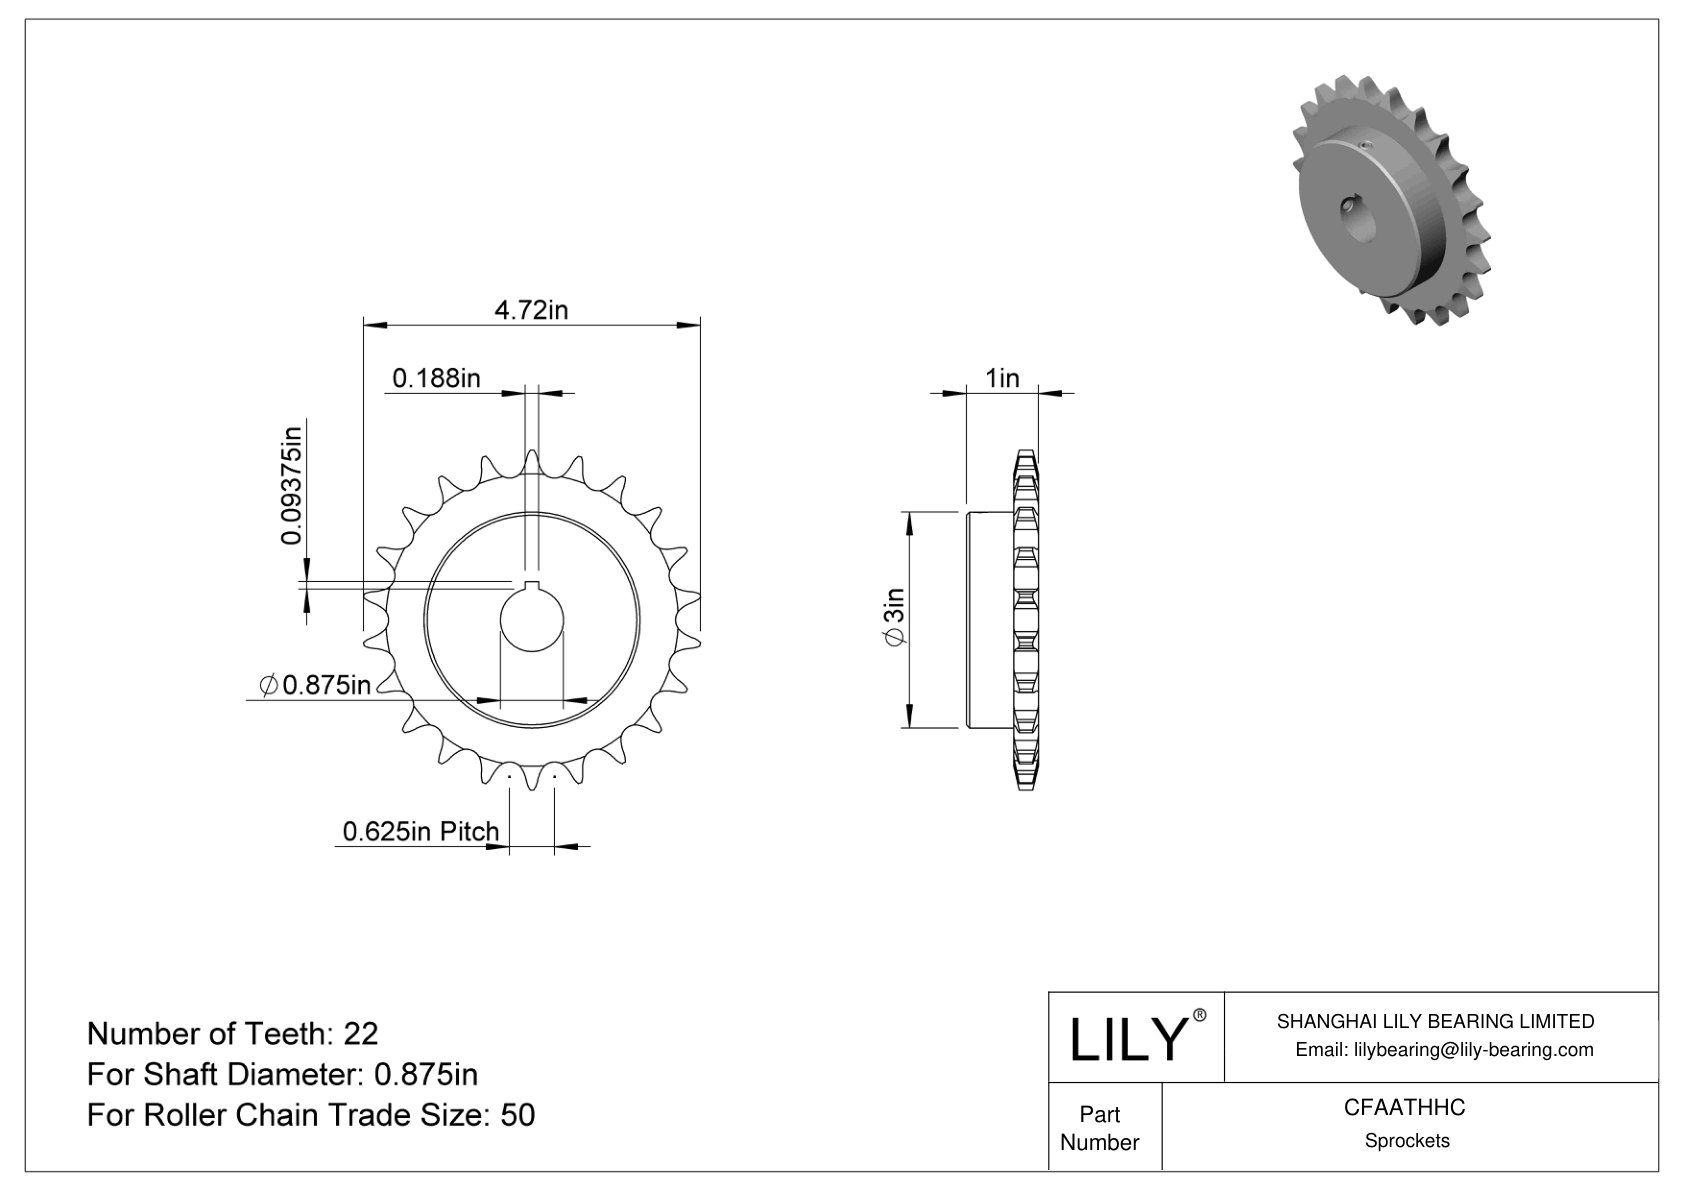 CFAATHHC Wear-Resistant Sprockets for ANSI Roller Chain cad drawing